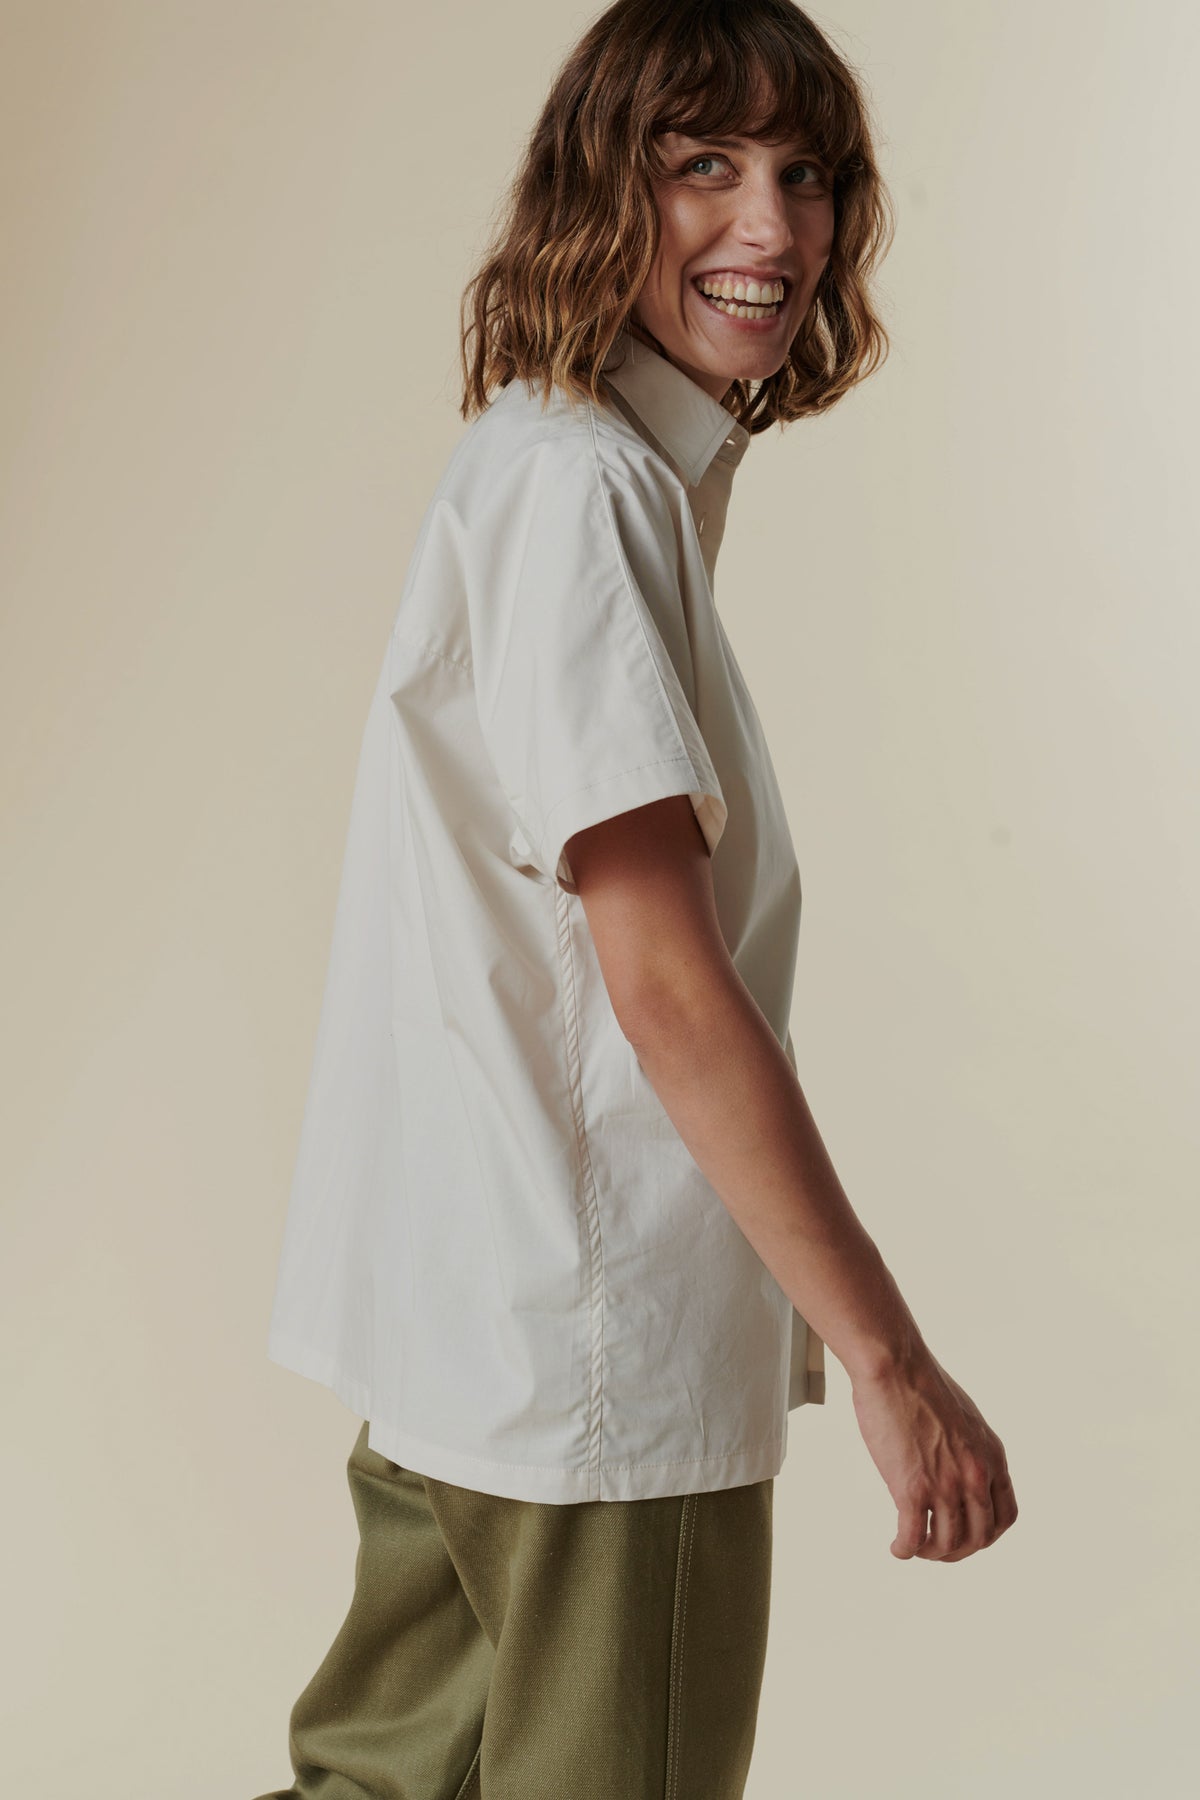 
            Side angle of smiling woman with mid length brown hair wearing the short sleeve Ava shirt in white with olive green combat pants